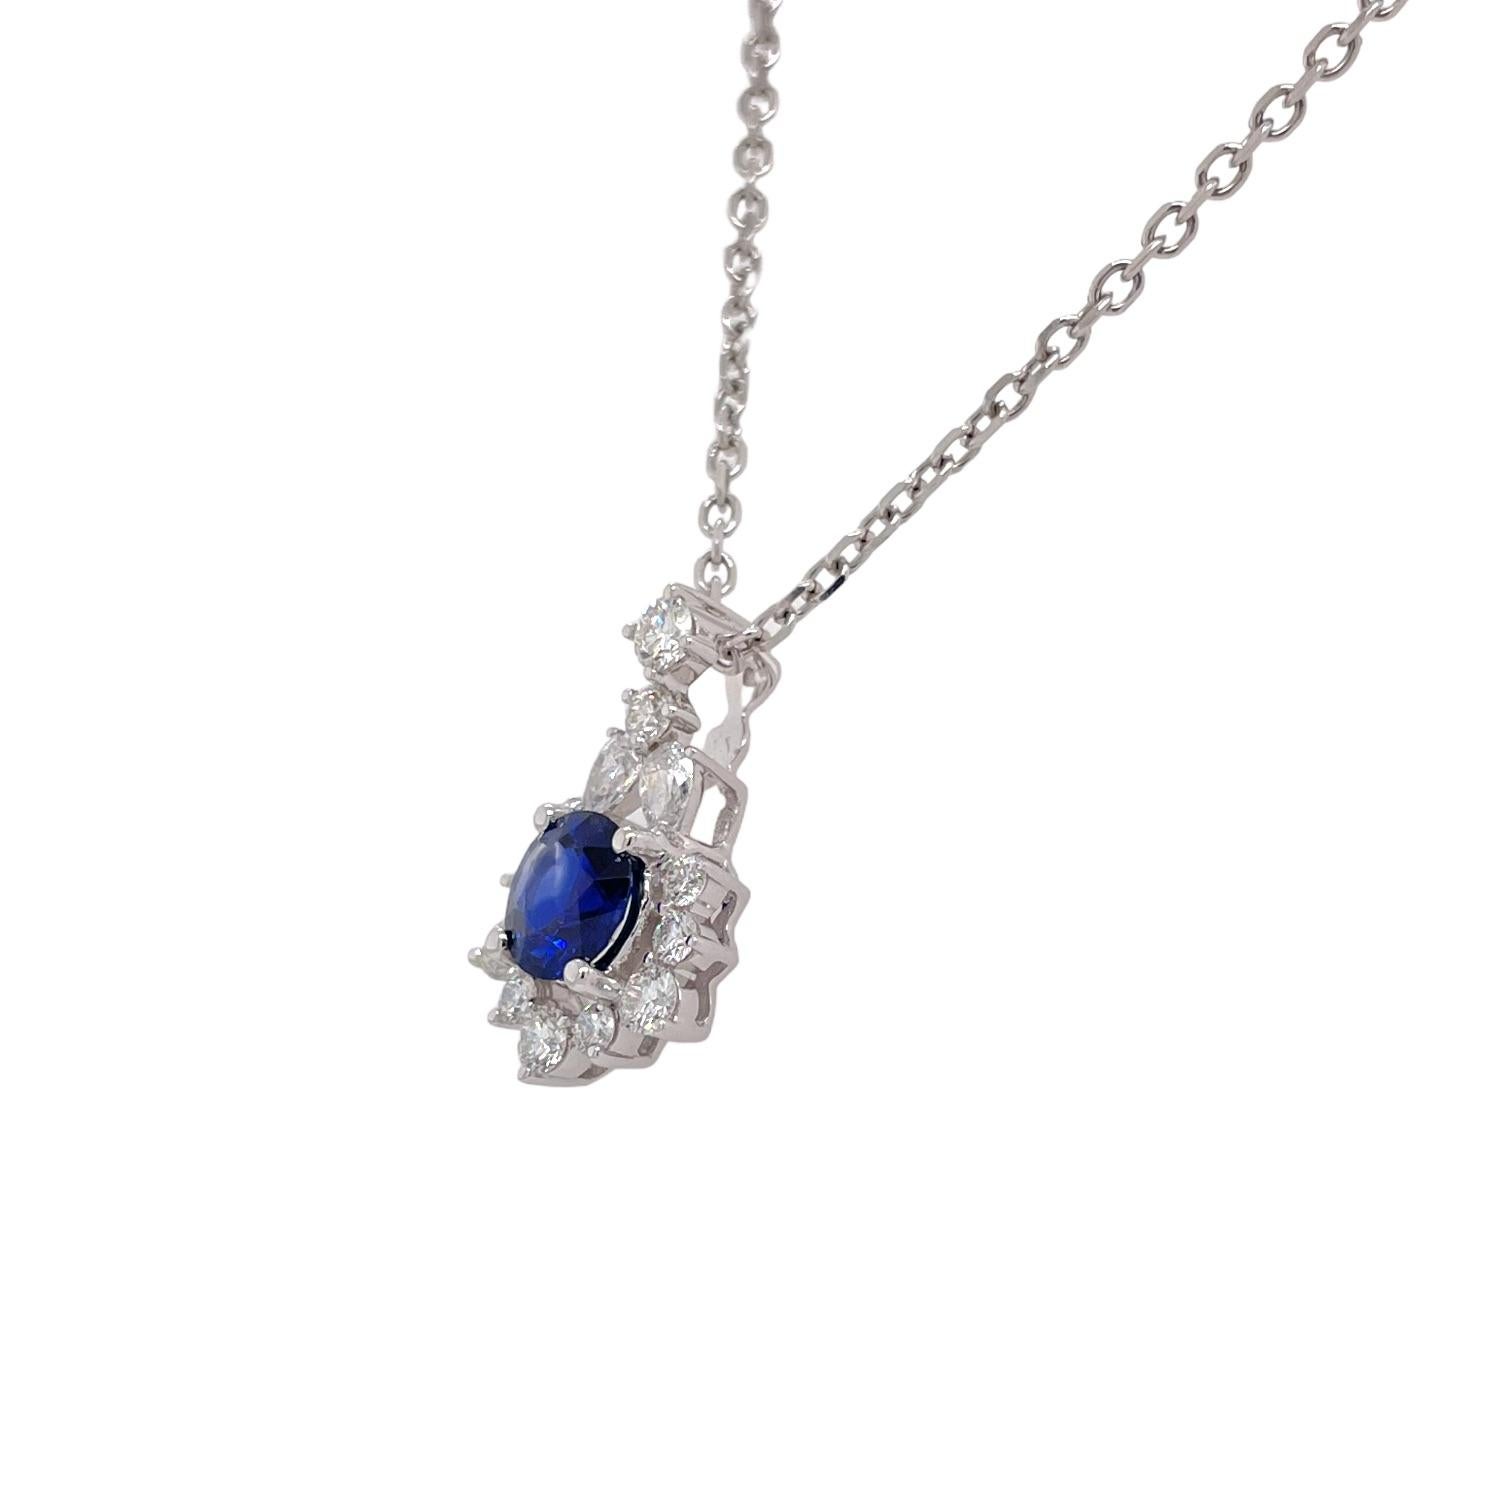 Pendant contains 1 center round brilliant sapphire, 0.85ct and round brilliant & pear shape diamonds surrounding, 0.56tcw. Diamonds are near colorless and SI1 in clarity. Pendant hangs from a 16